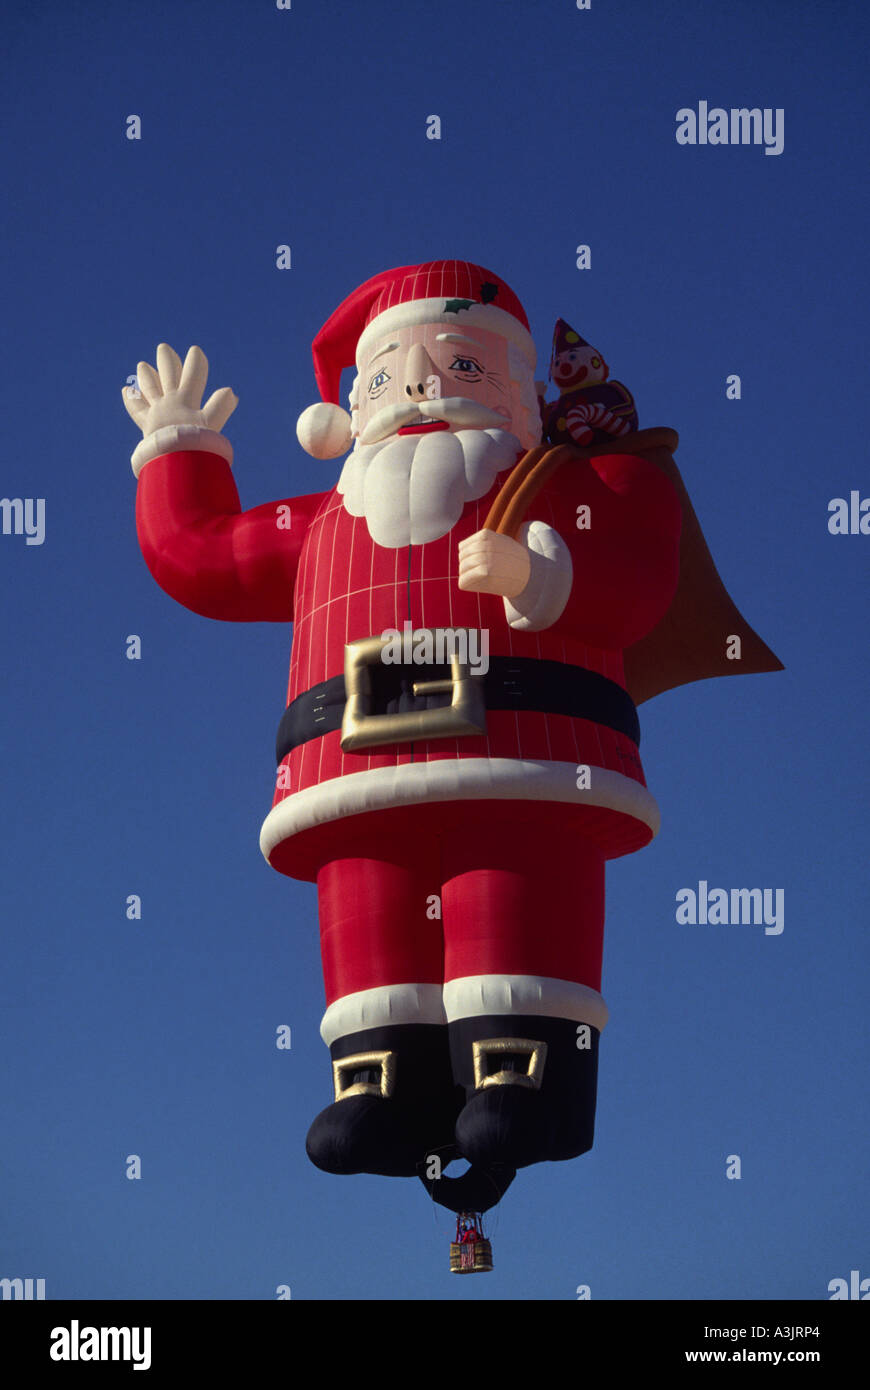 Father Christmas hot air balloon in flight Stock Photo